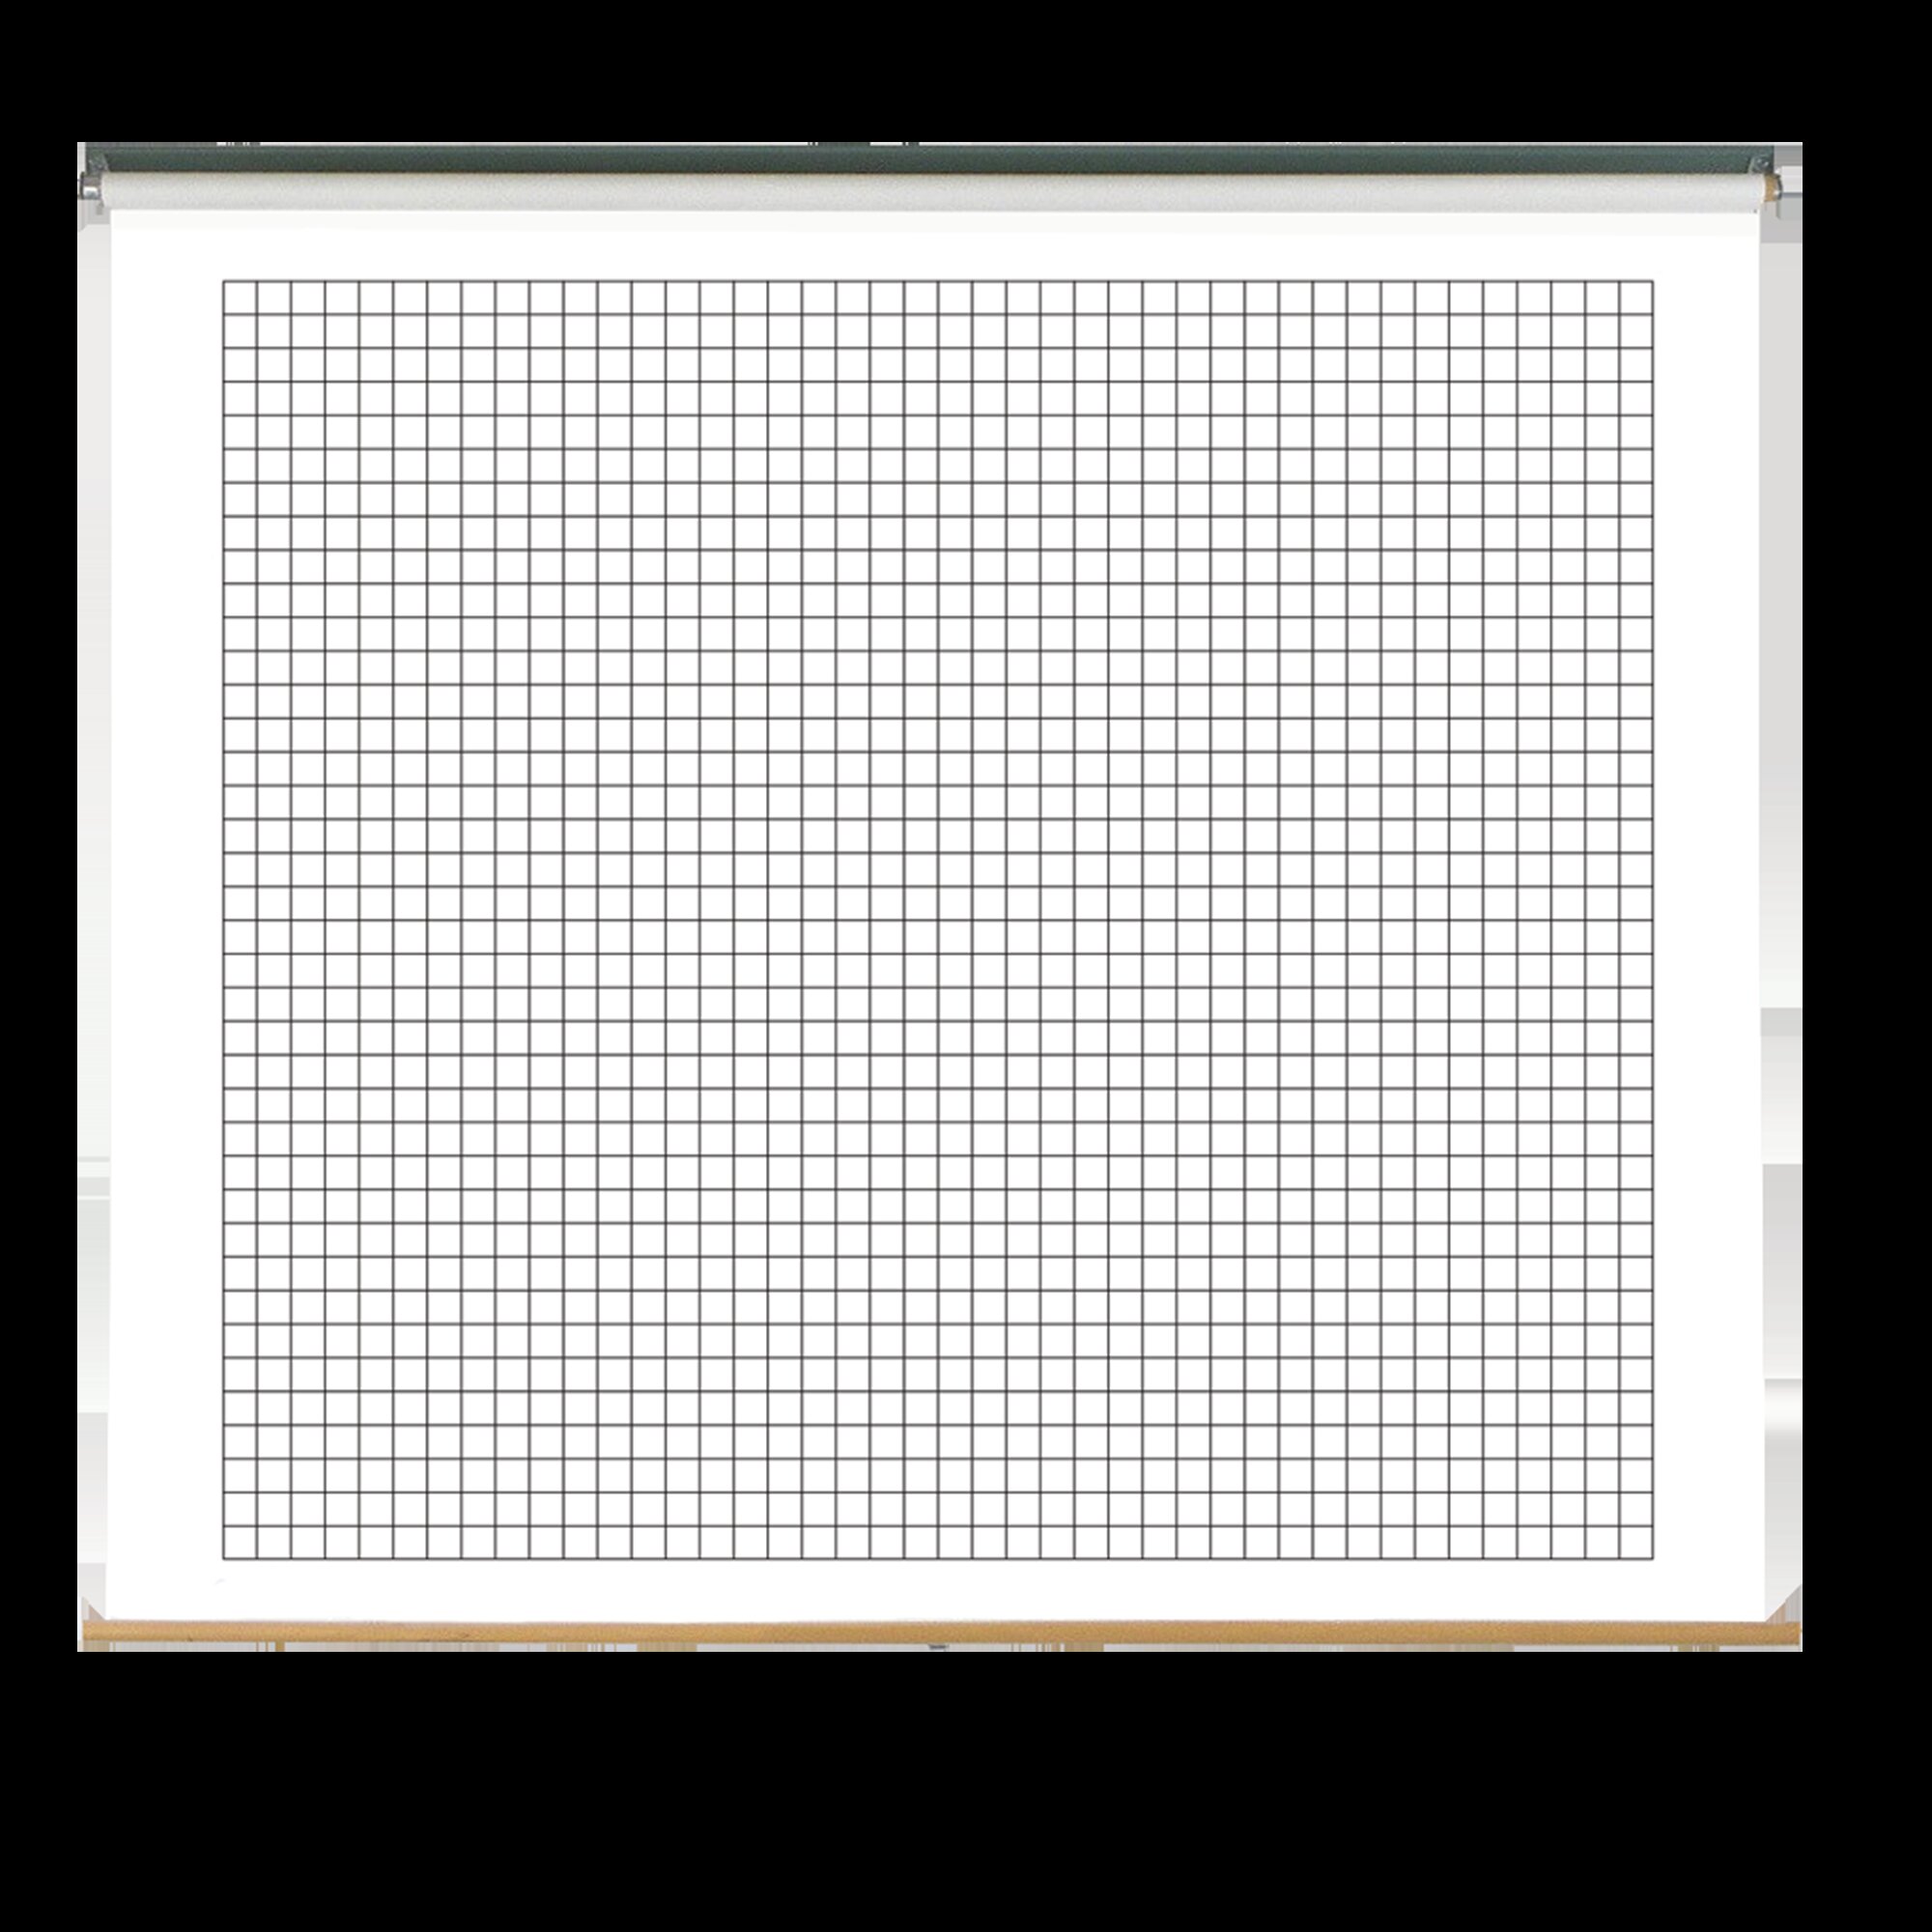 Geyer Instructional Products Tableau blanc mural calendrier